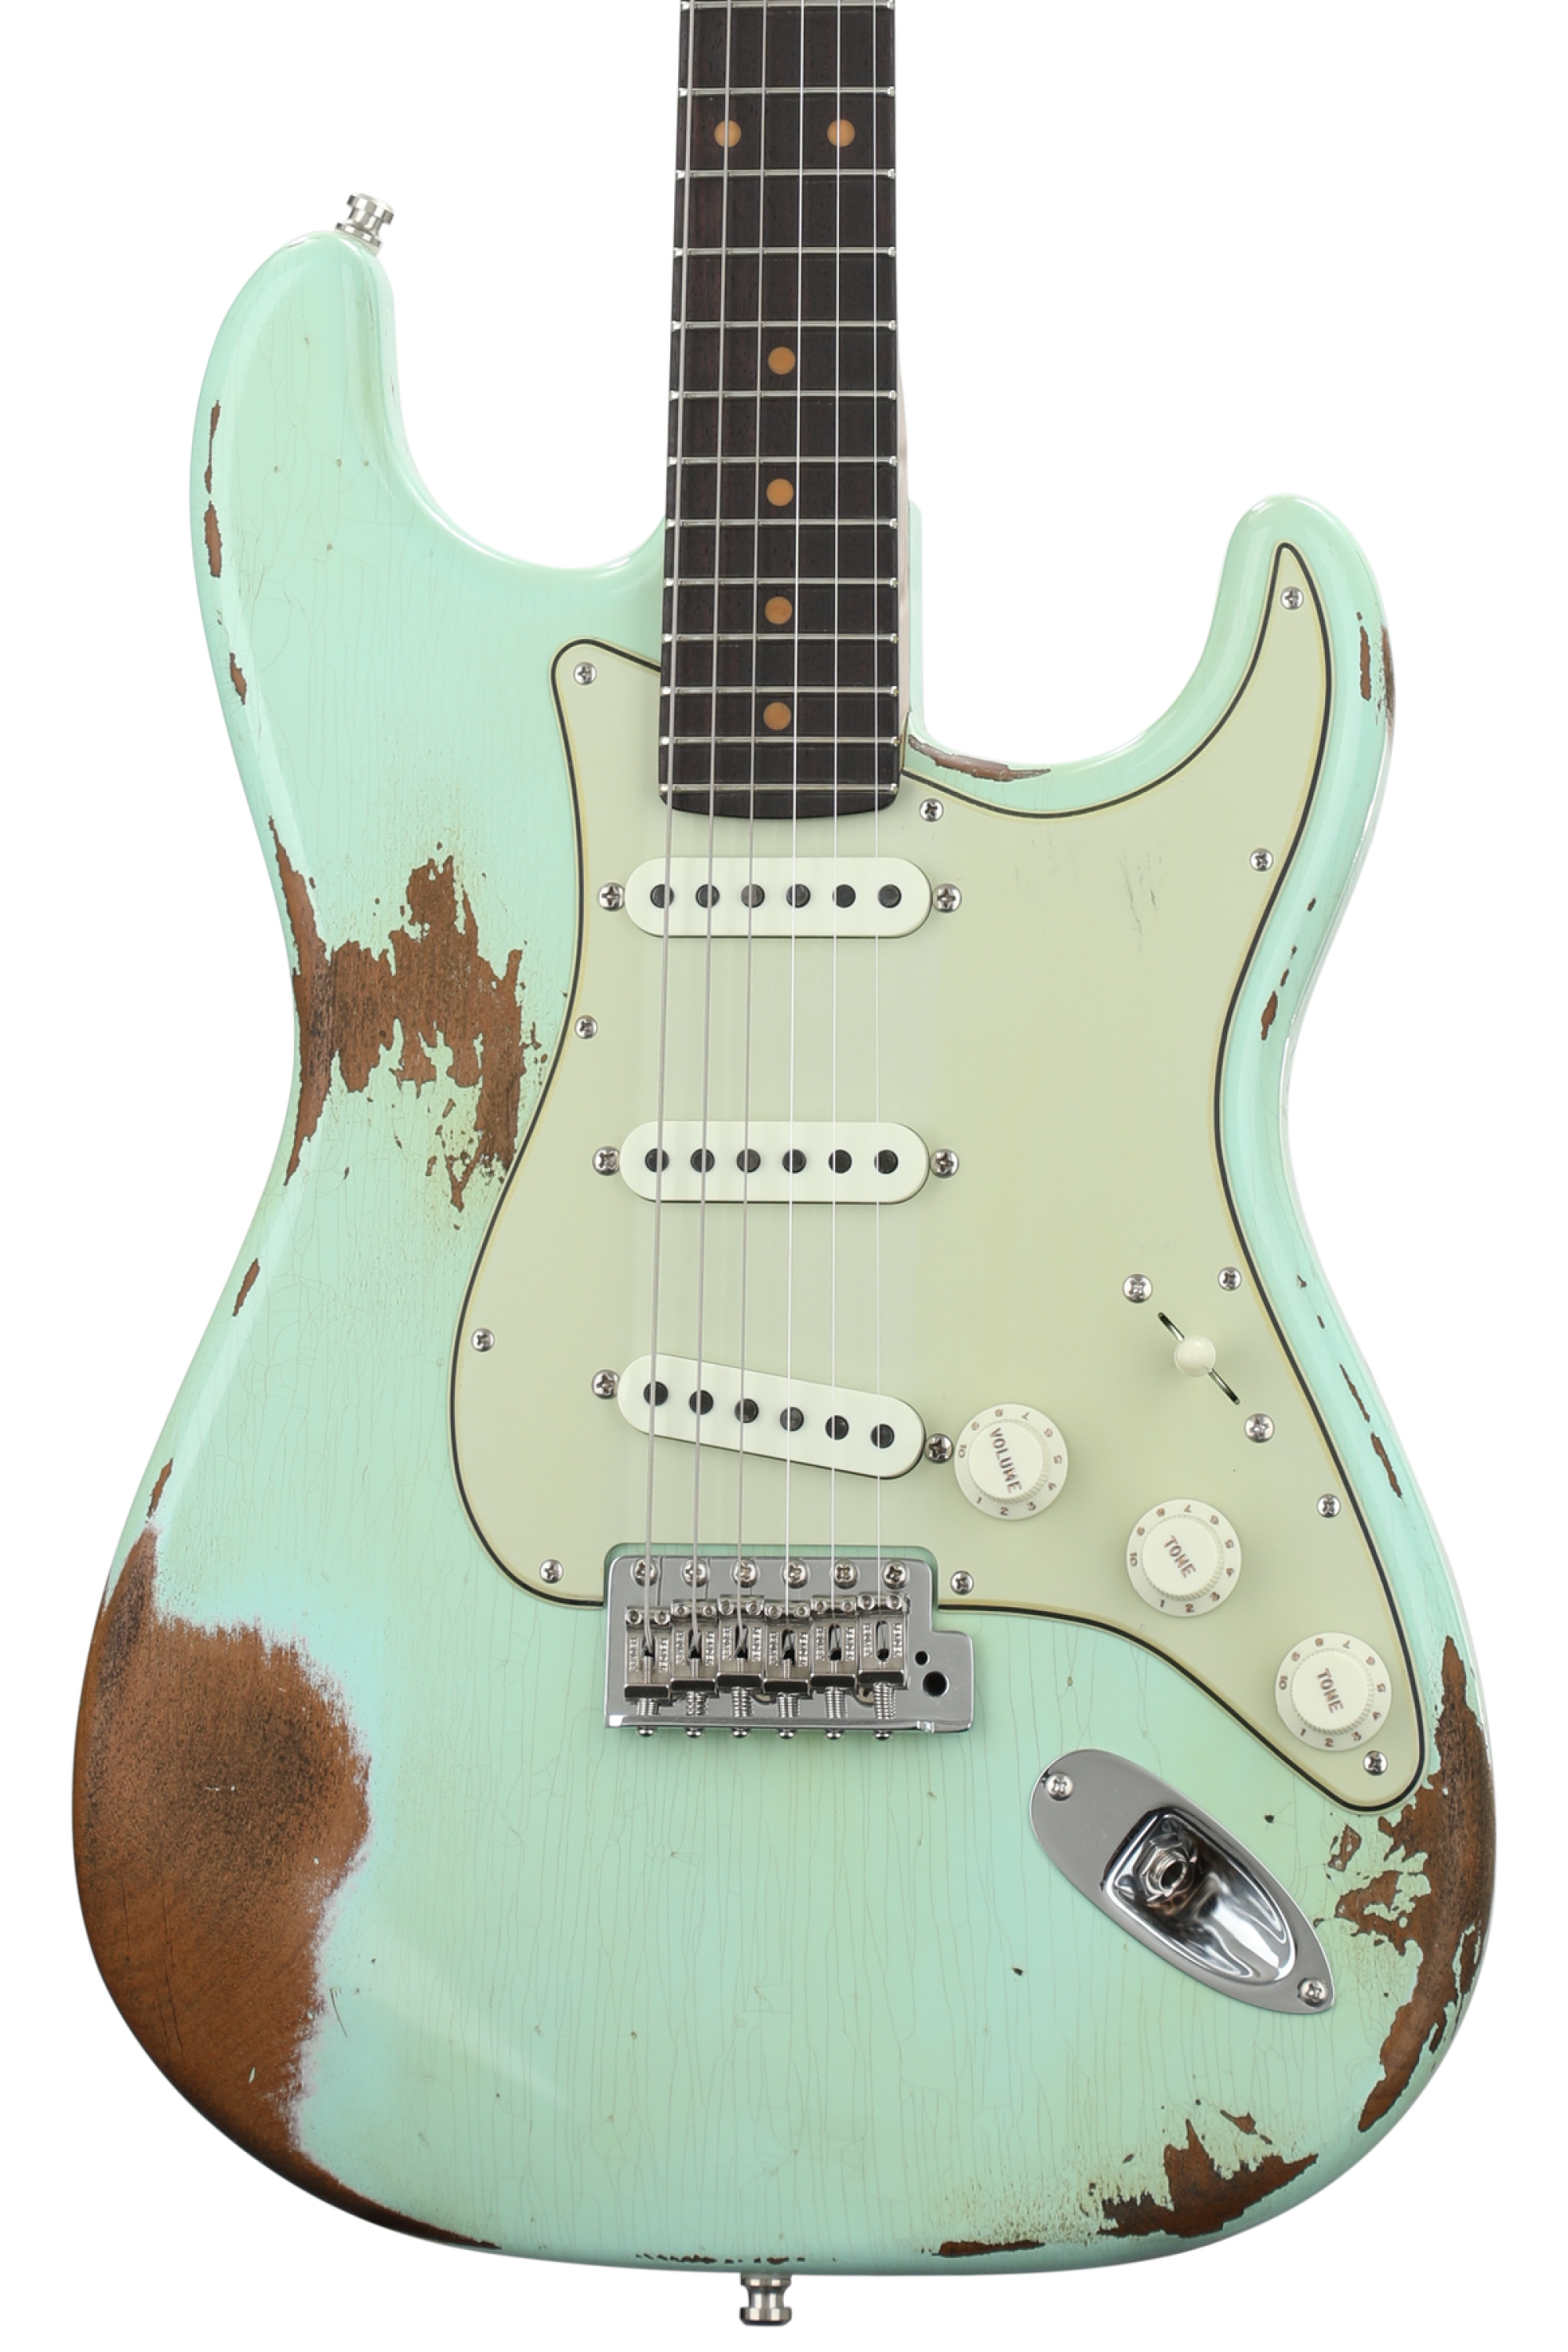 Fender Custom Shop GT11 Heavy Relic Stratocaster - Surf Green - Sweetwater  Exclusive